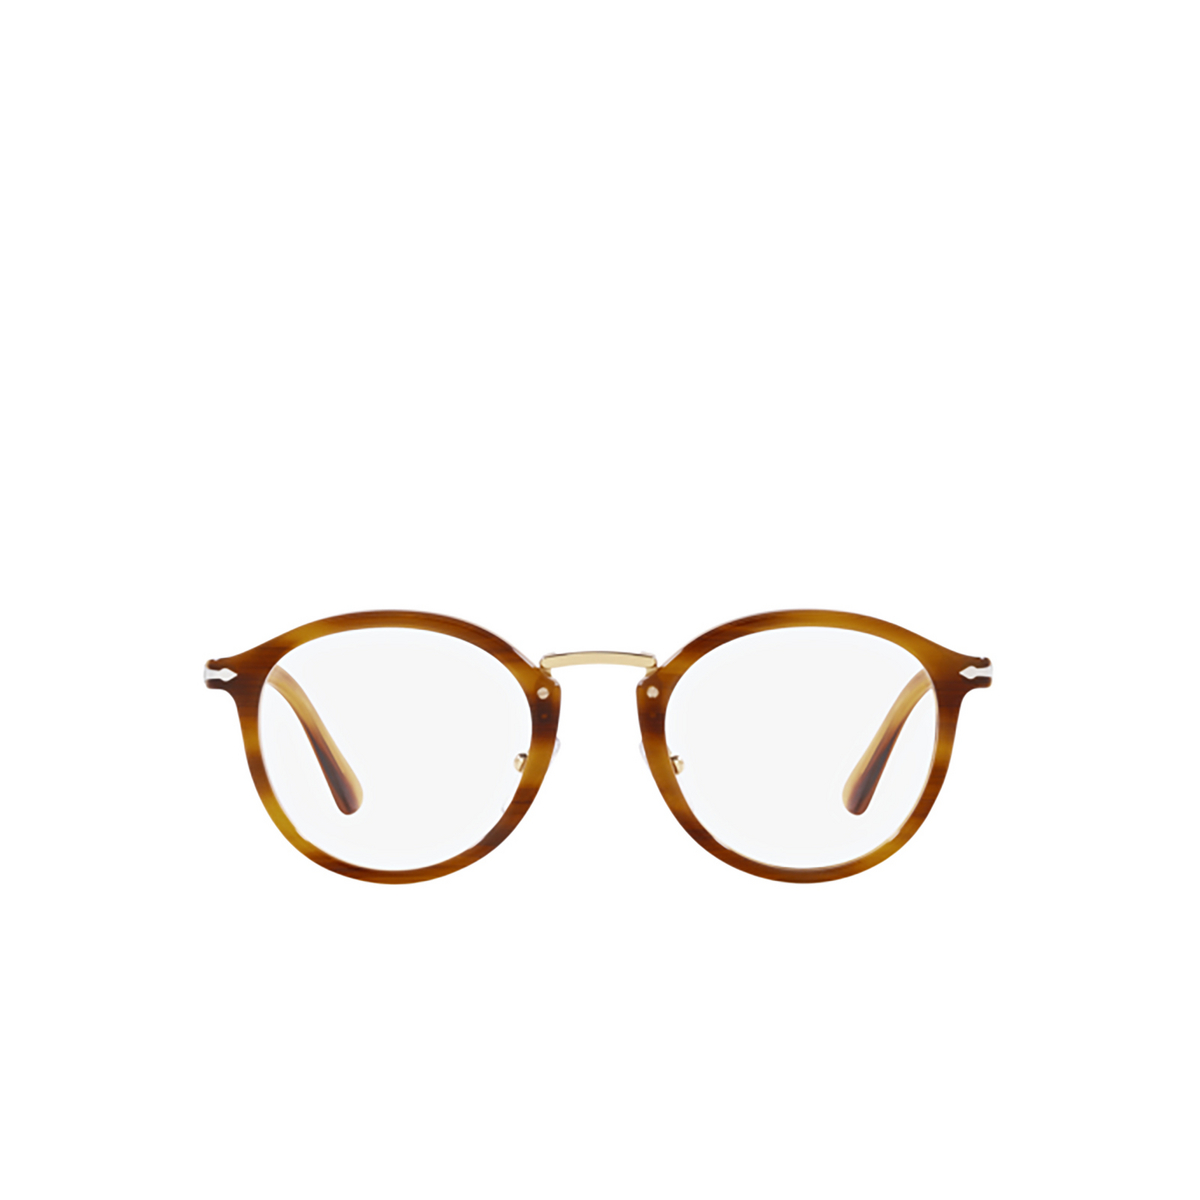 Persol VICO Eyeglasses 960 Striped Brown - front view